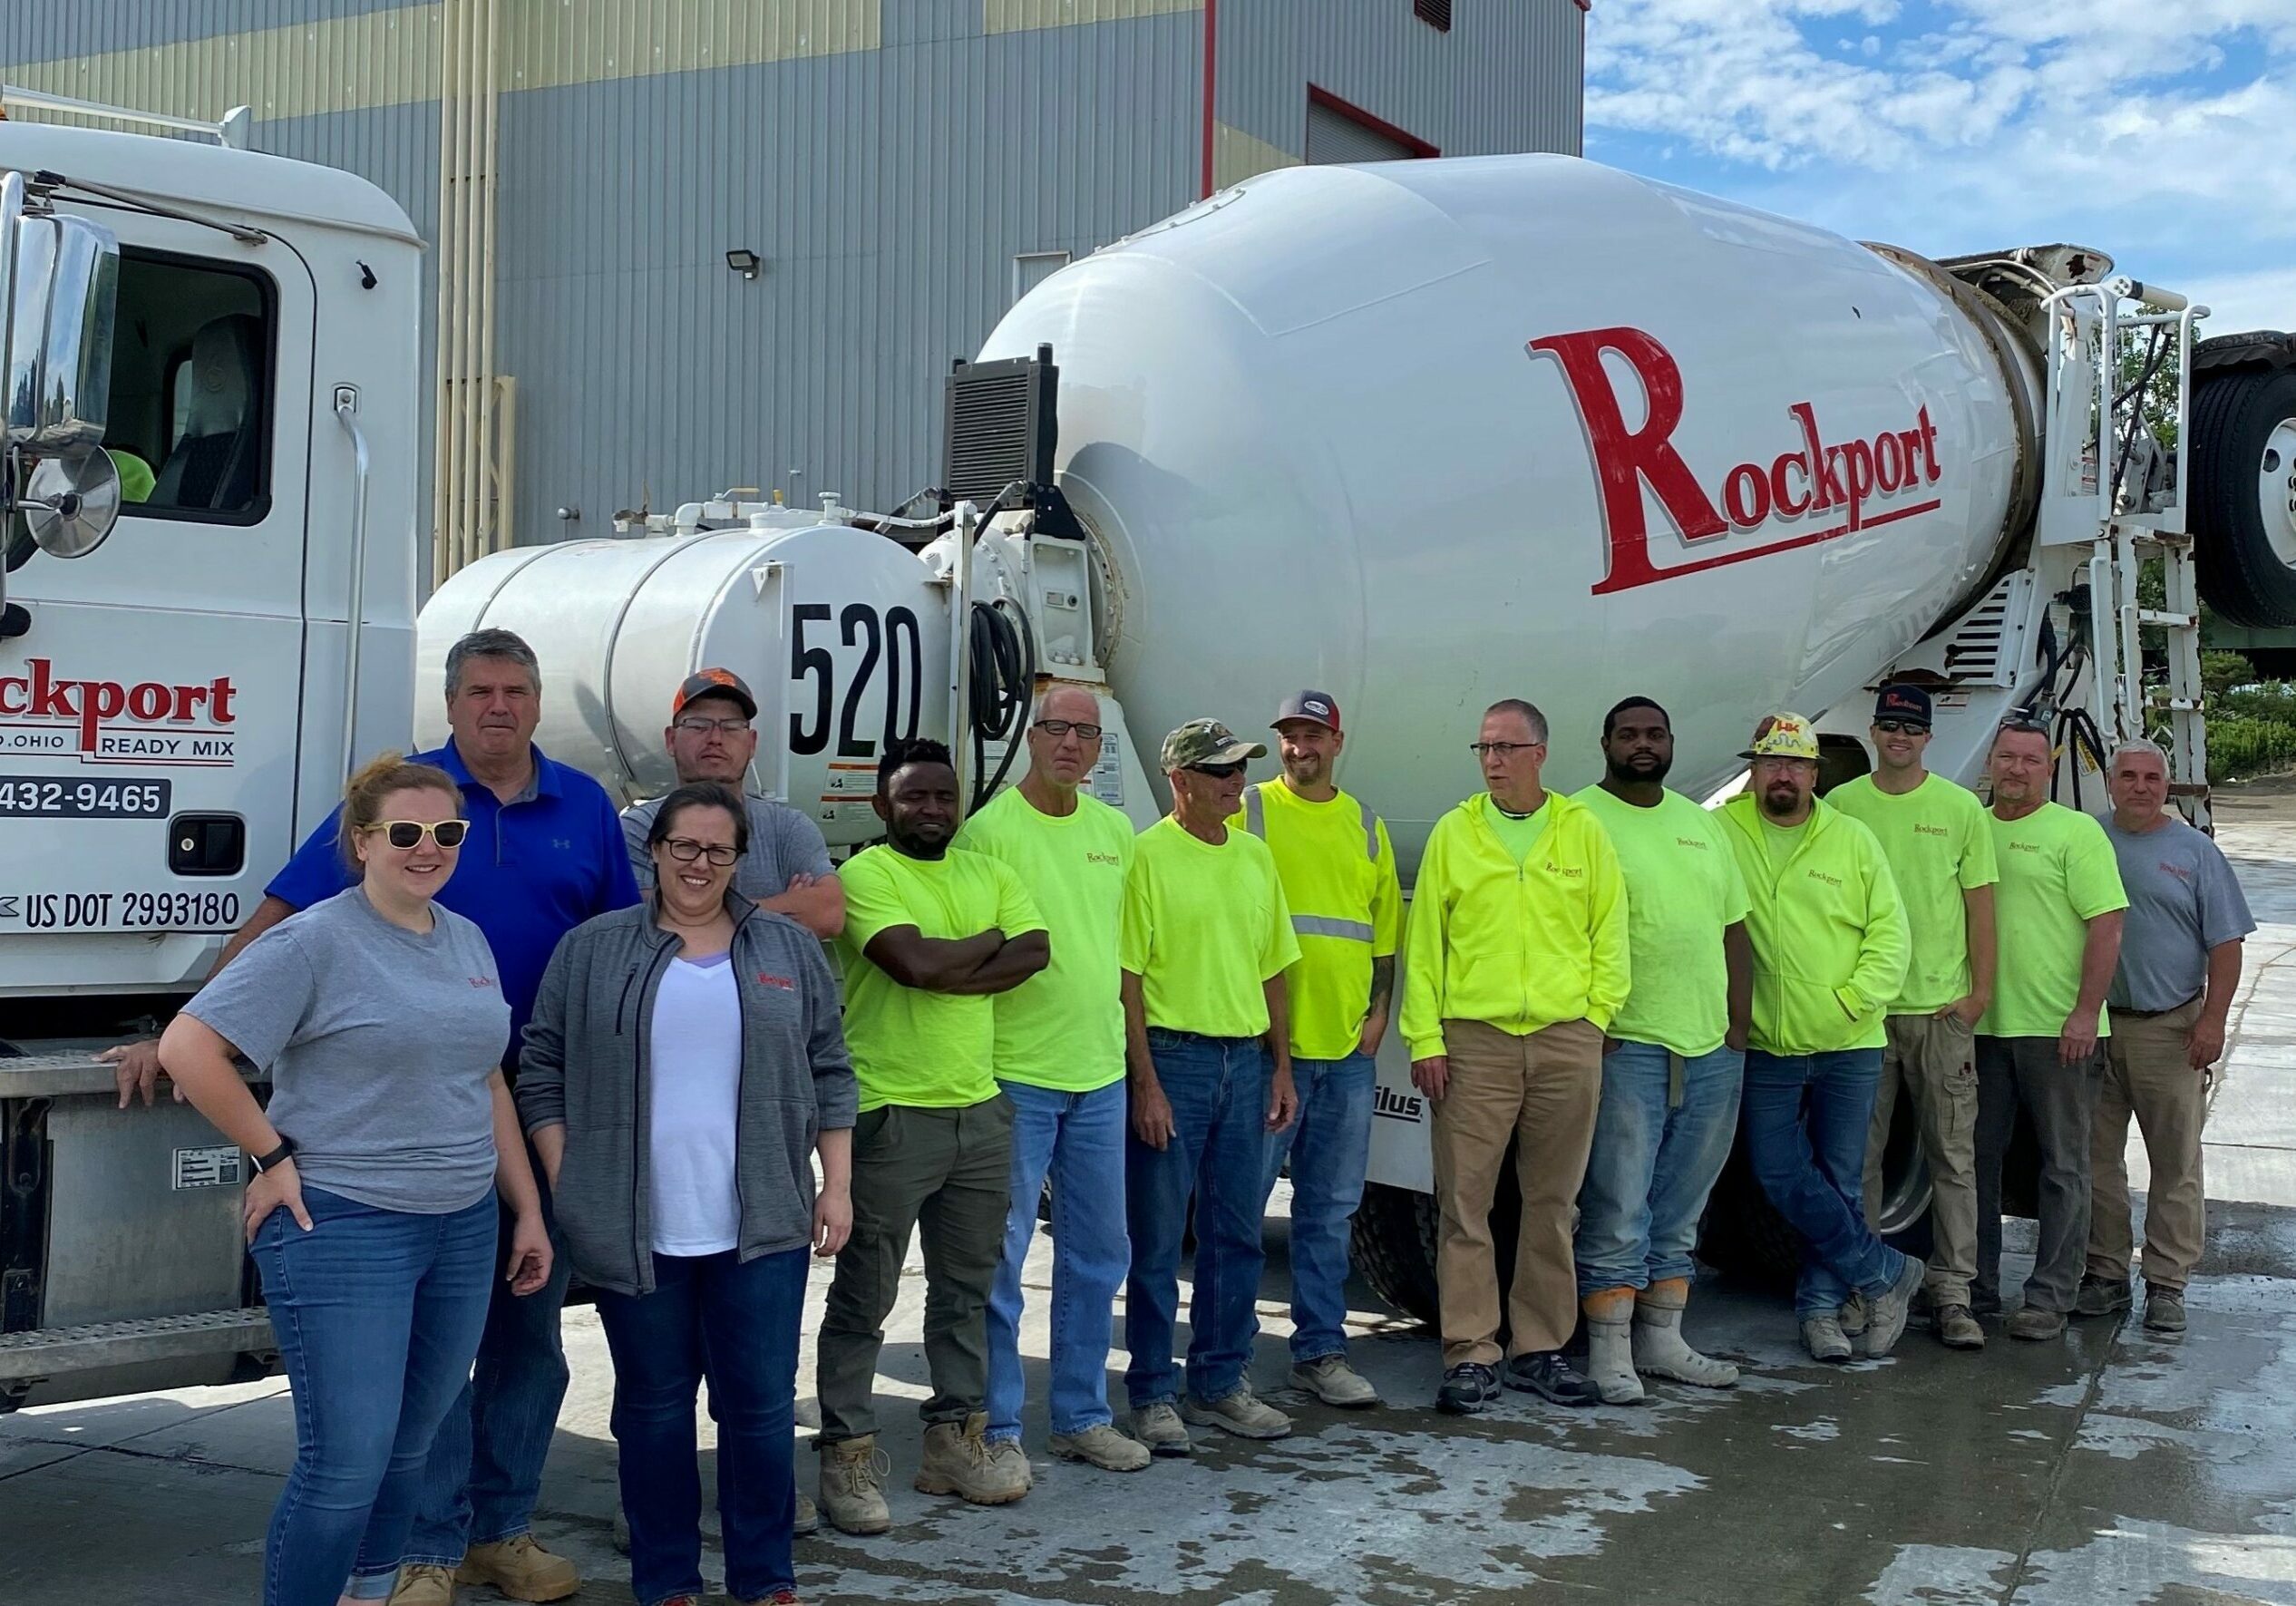 A team of crew members and employees stands in front of a white cement truck with the Rockport Ready Mix logo